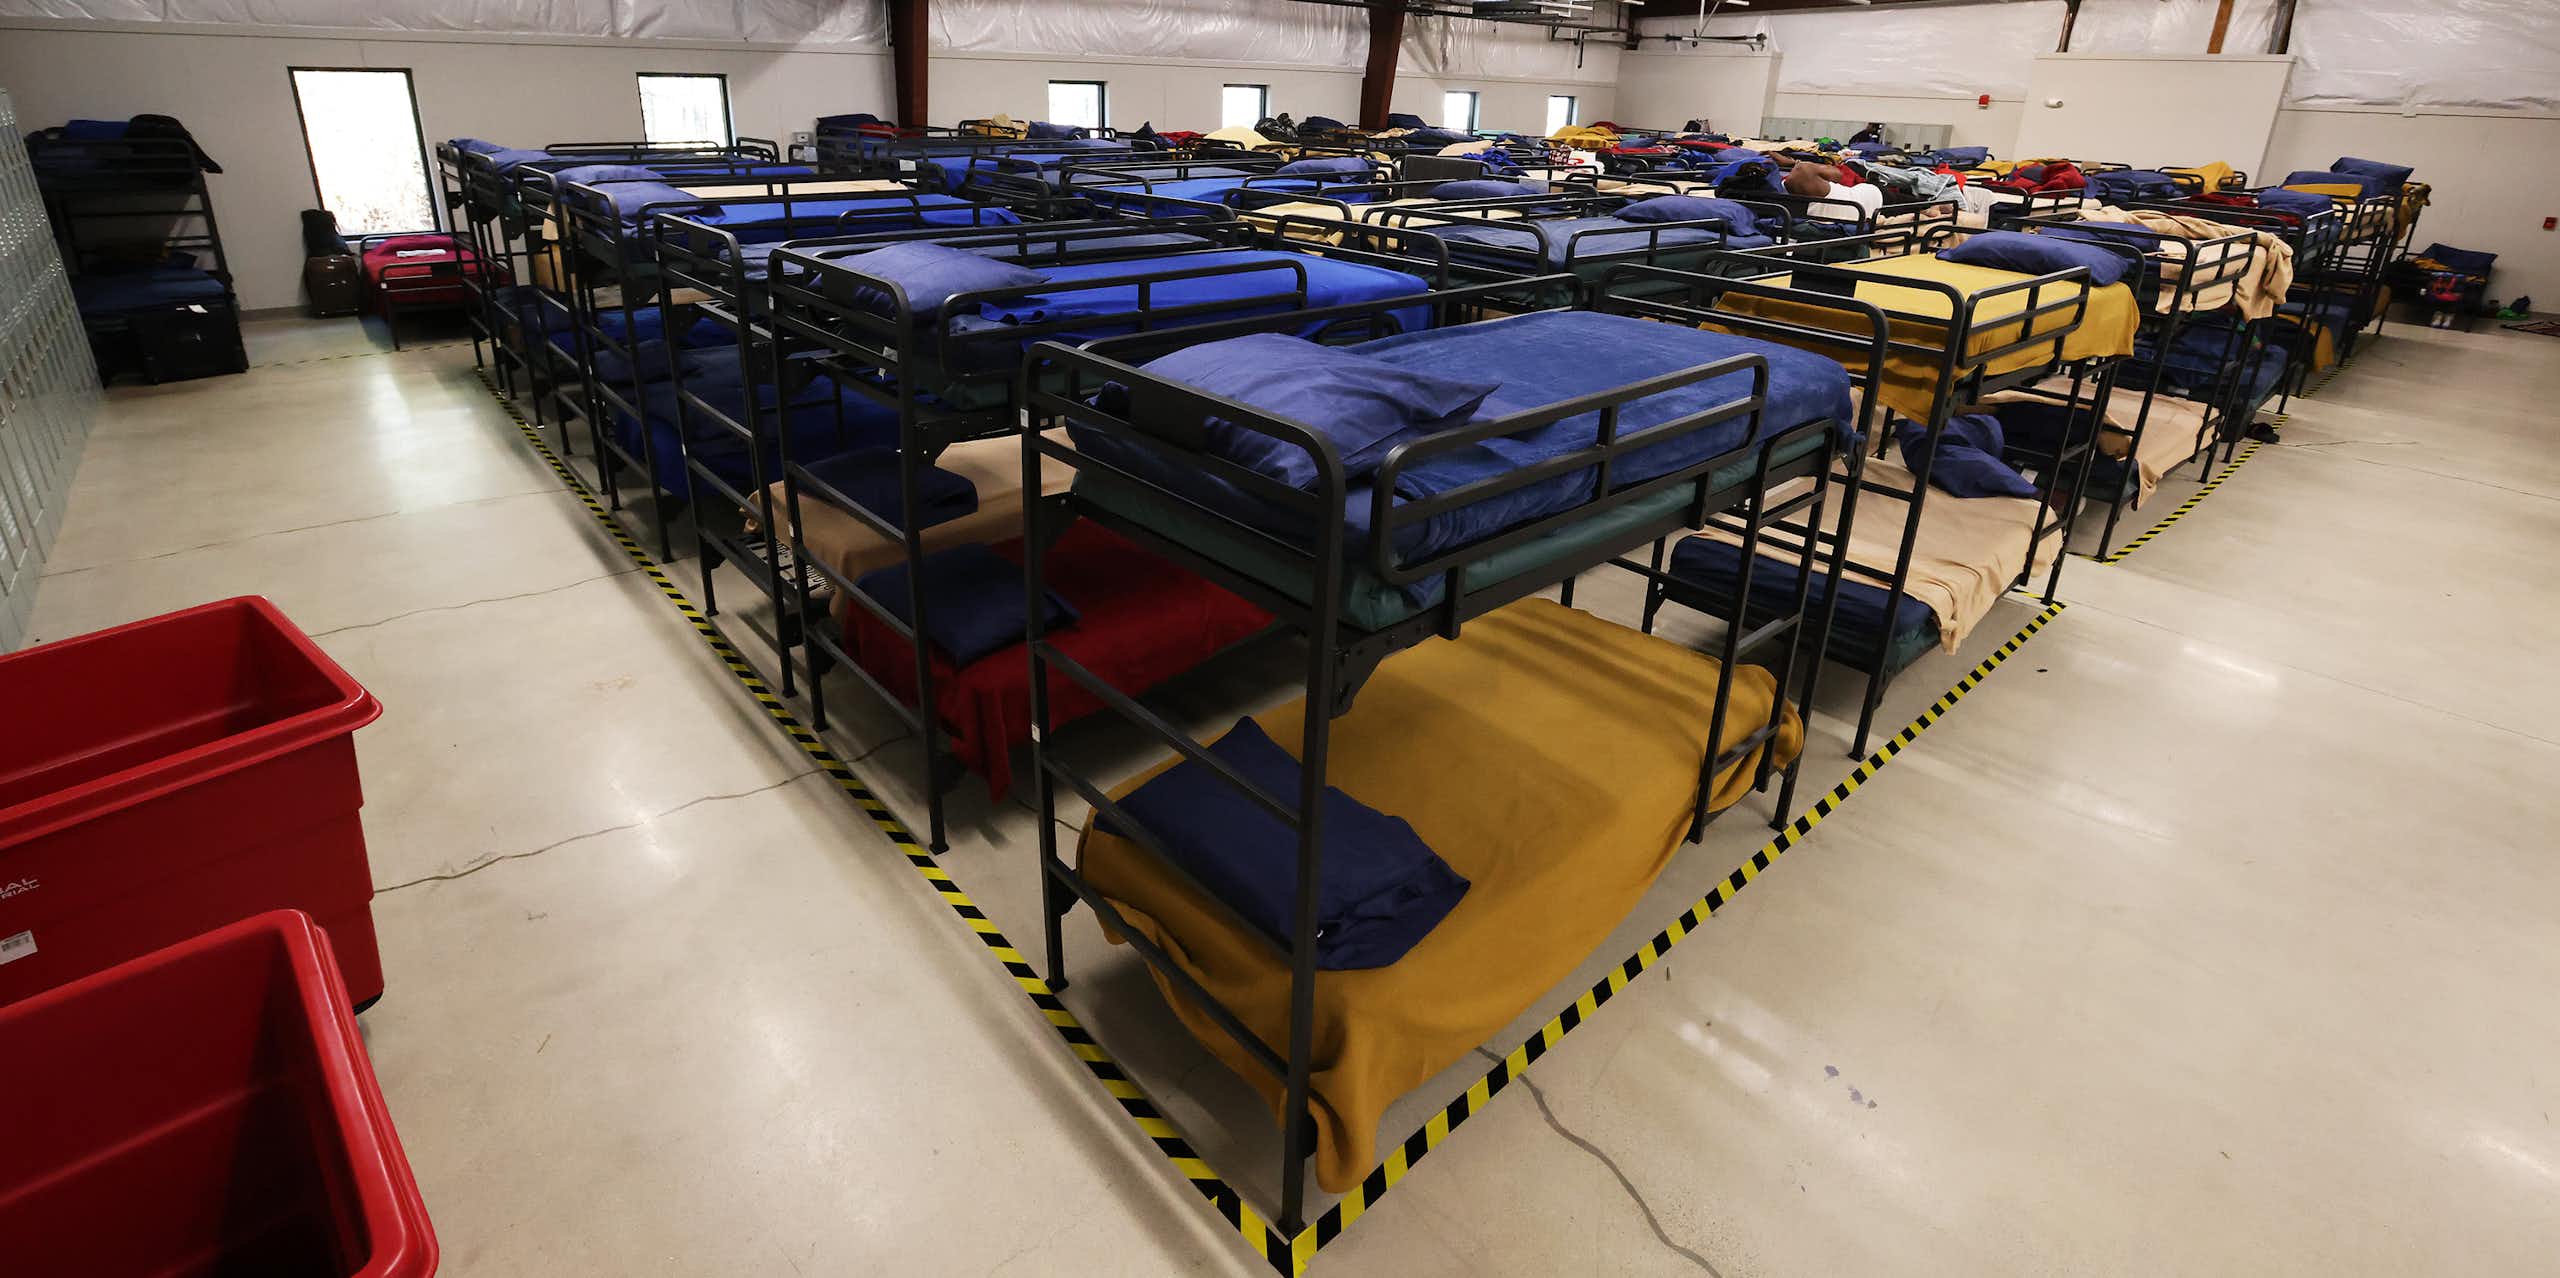 Rows of neatly made bunk beds in a large, brightly lit room.